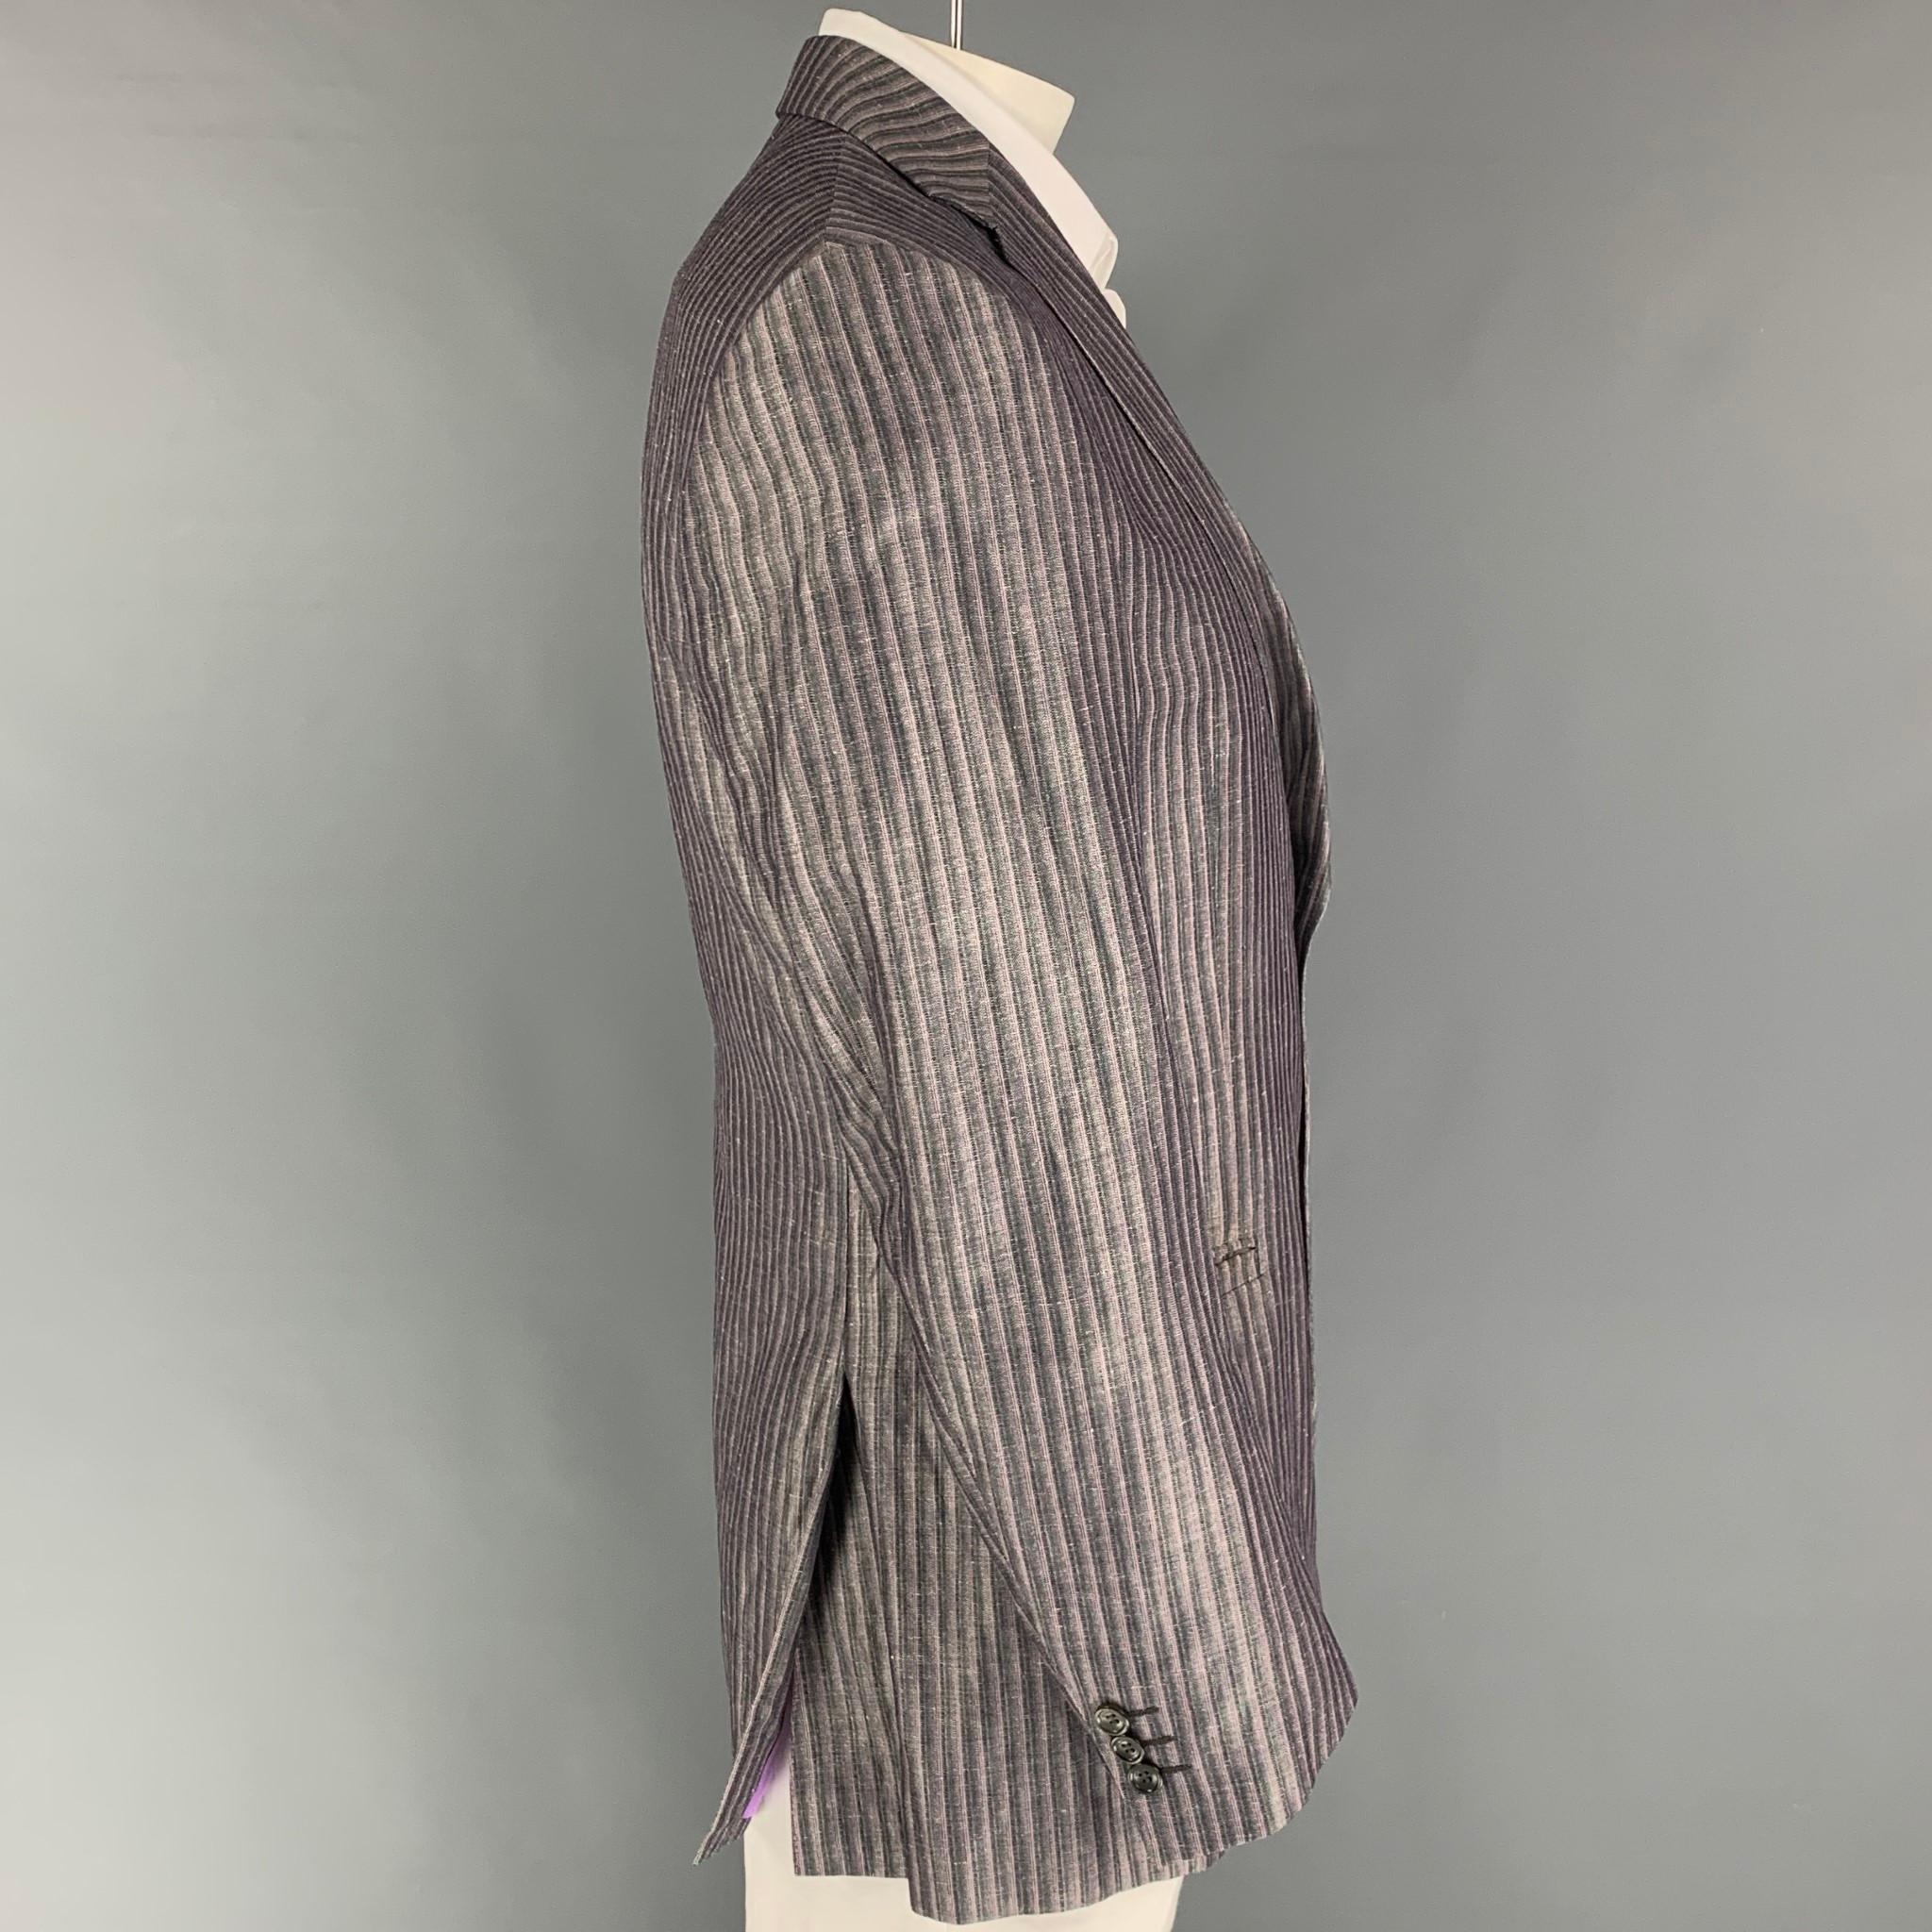 VERSACE COLLECTION sport coat comes in a lavender & pink stripe wool / line featuring a notch lapel, slit pockets, double back vent, and a double button closure. 

Very Good Pre-Owned Condition.
Marked: 54

Measurements:

Shoulder: 19 in.
Chest: 54